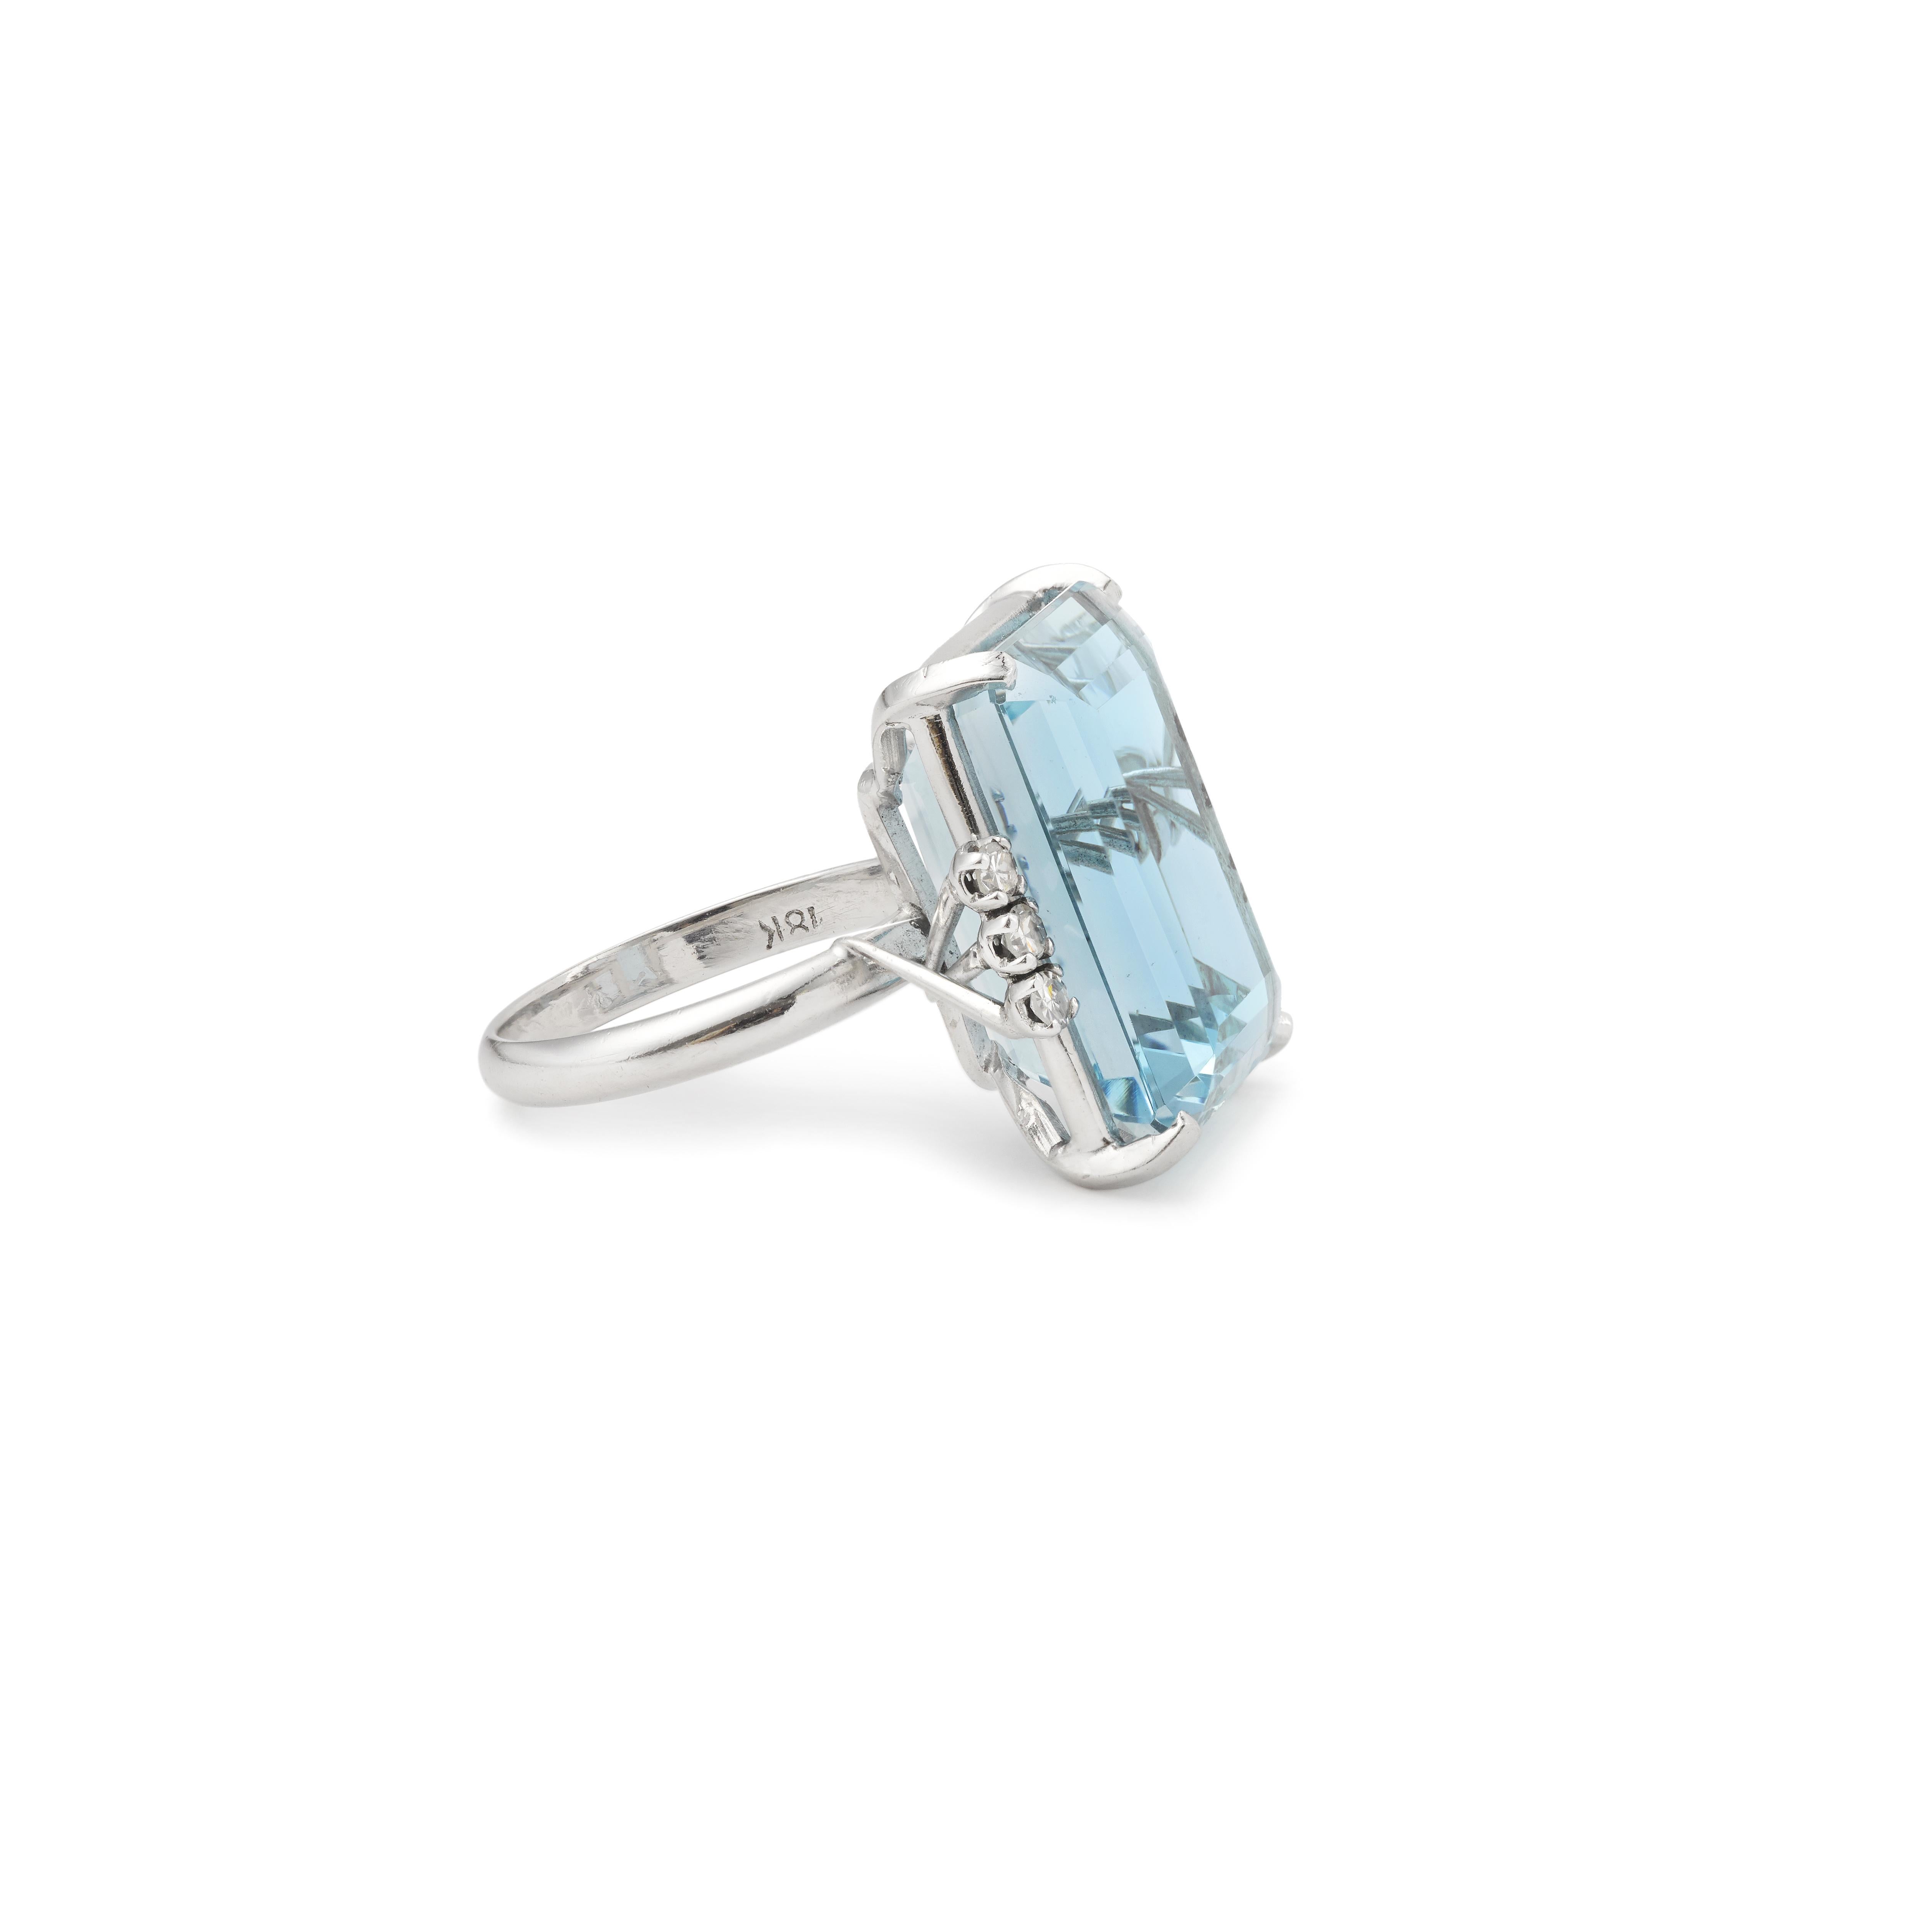 Stunning 18K Gold 16.5 ct Aquamarine 6 Diamonds Cocktail Ring

This gorgeous 16.5 carat deep blue emerald faceted cut aquamarine ring has excellent color and is eye cleaned, set with 6 lovely brilliant cut diamonds of white color and good clarity,